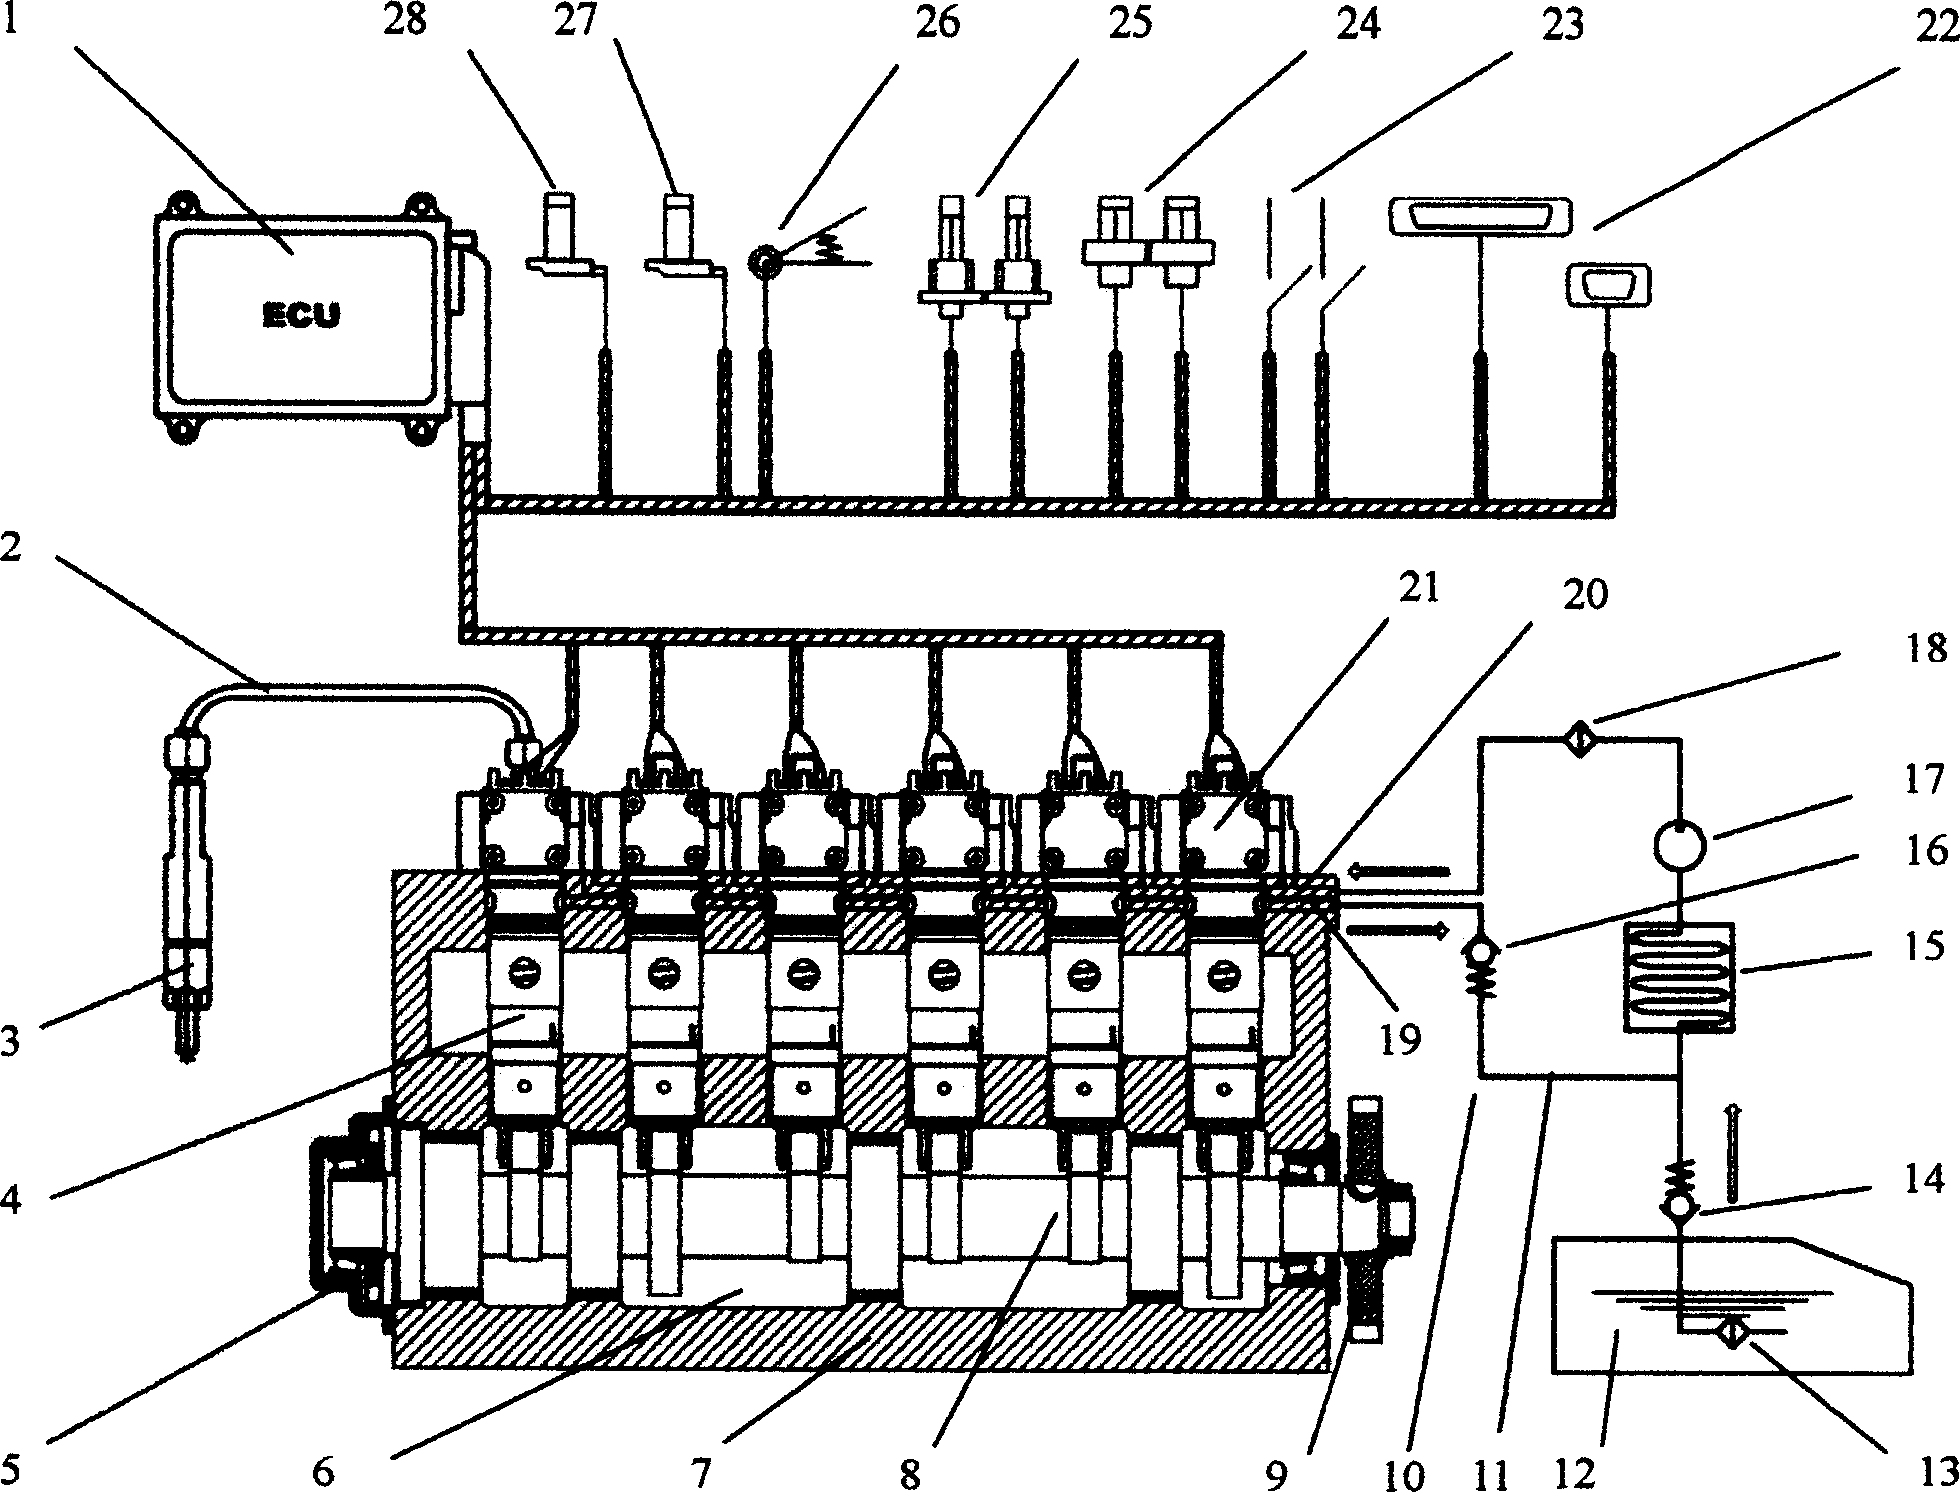 Electrical control upright arrangement integrated pump / valve - pipe - nozzle spraying system